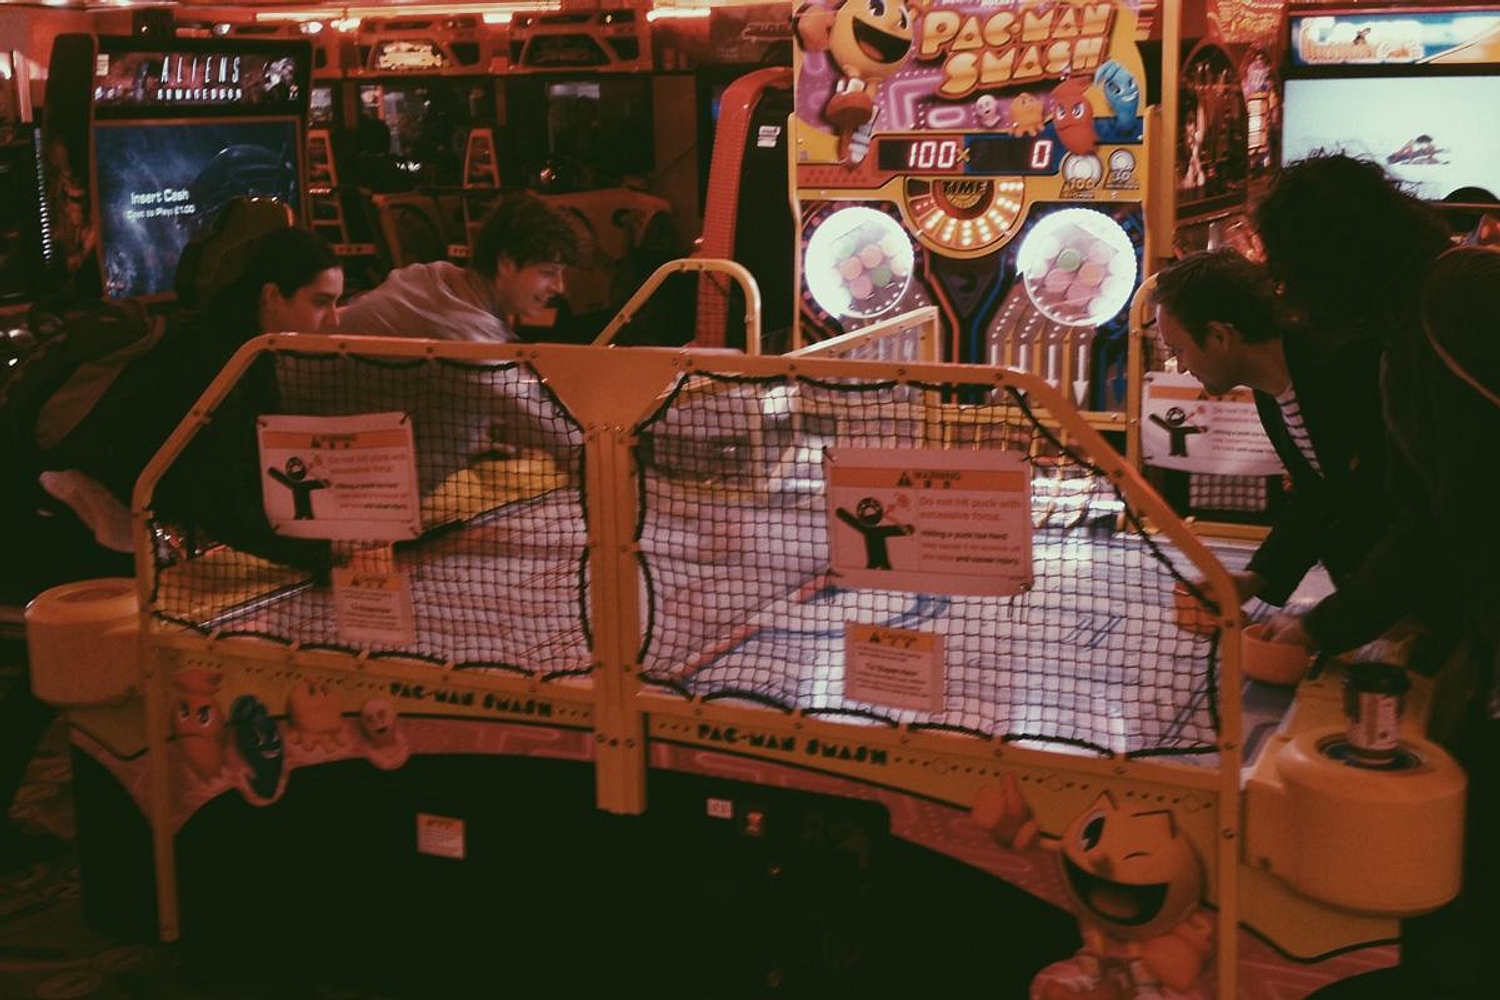 Air hockey, raging bulls and Palma Violets: Kid Wave share exclusive tour diary